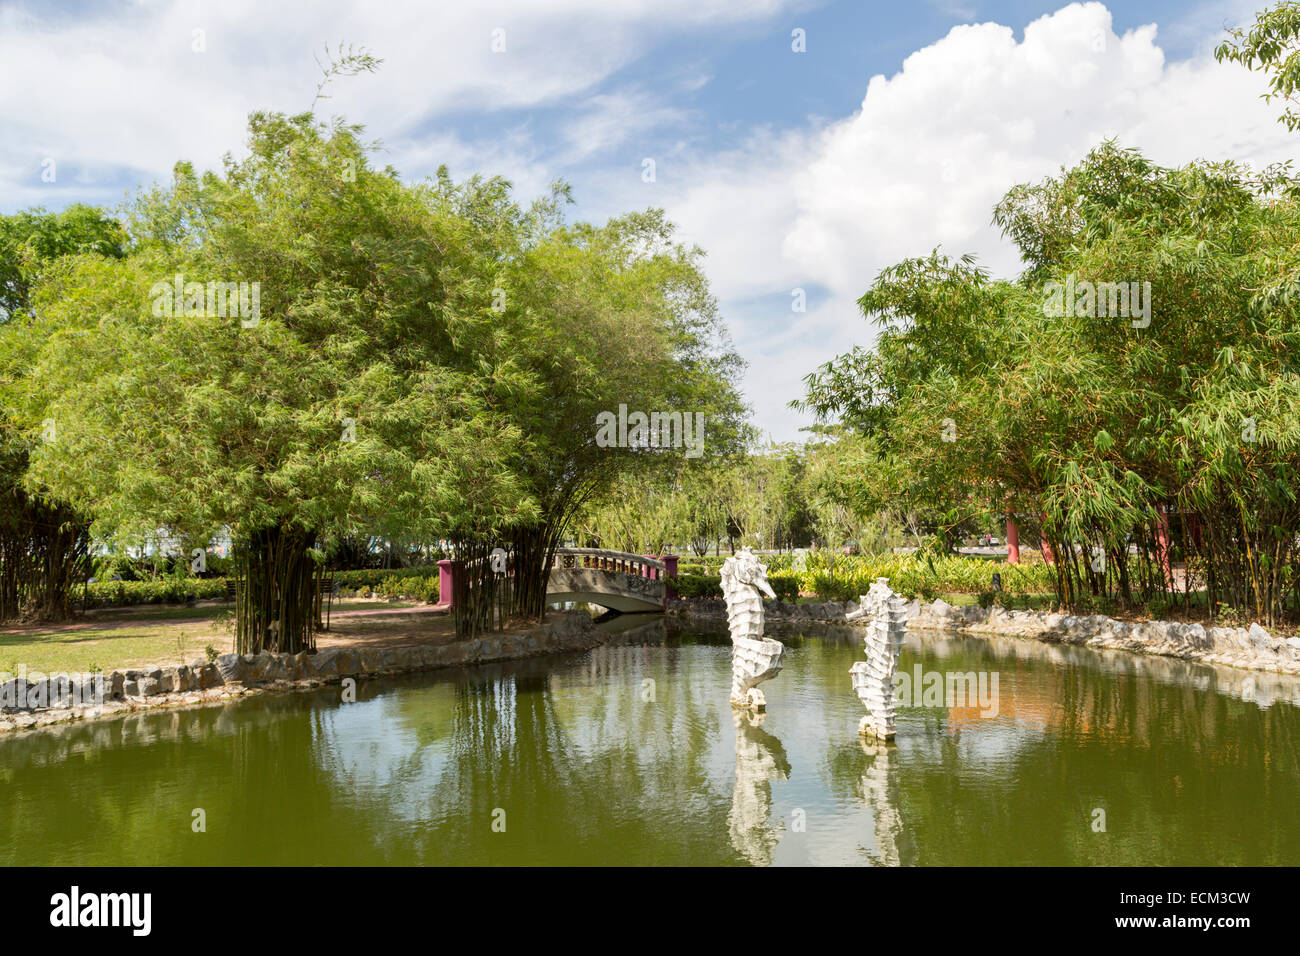 Seahorse sculptures in Chinese Garden pool in City Fan park, Miri, Malaysia Stock Photo